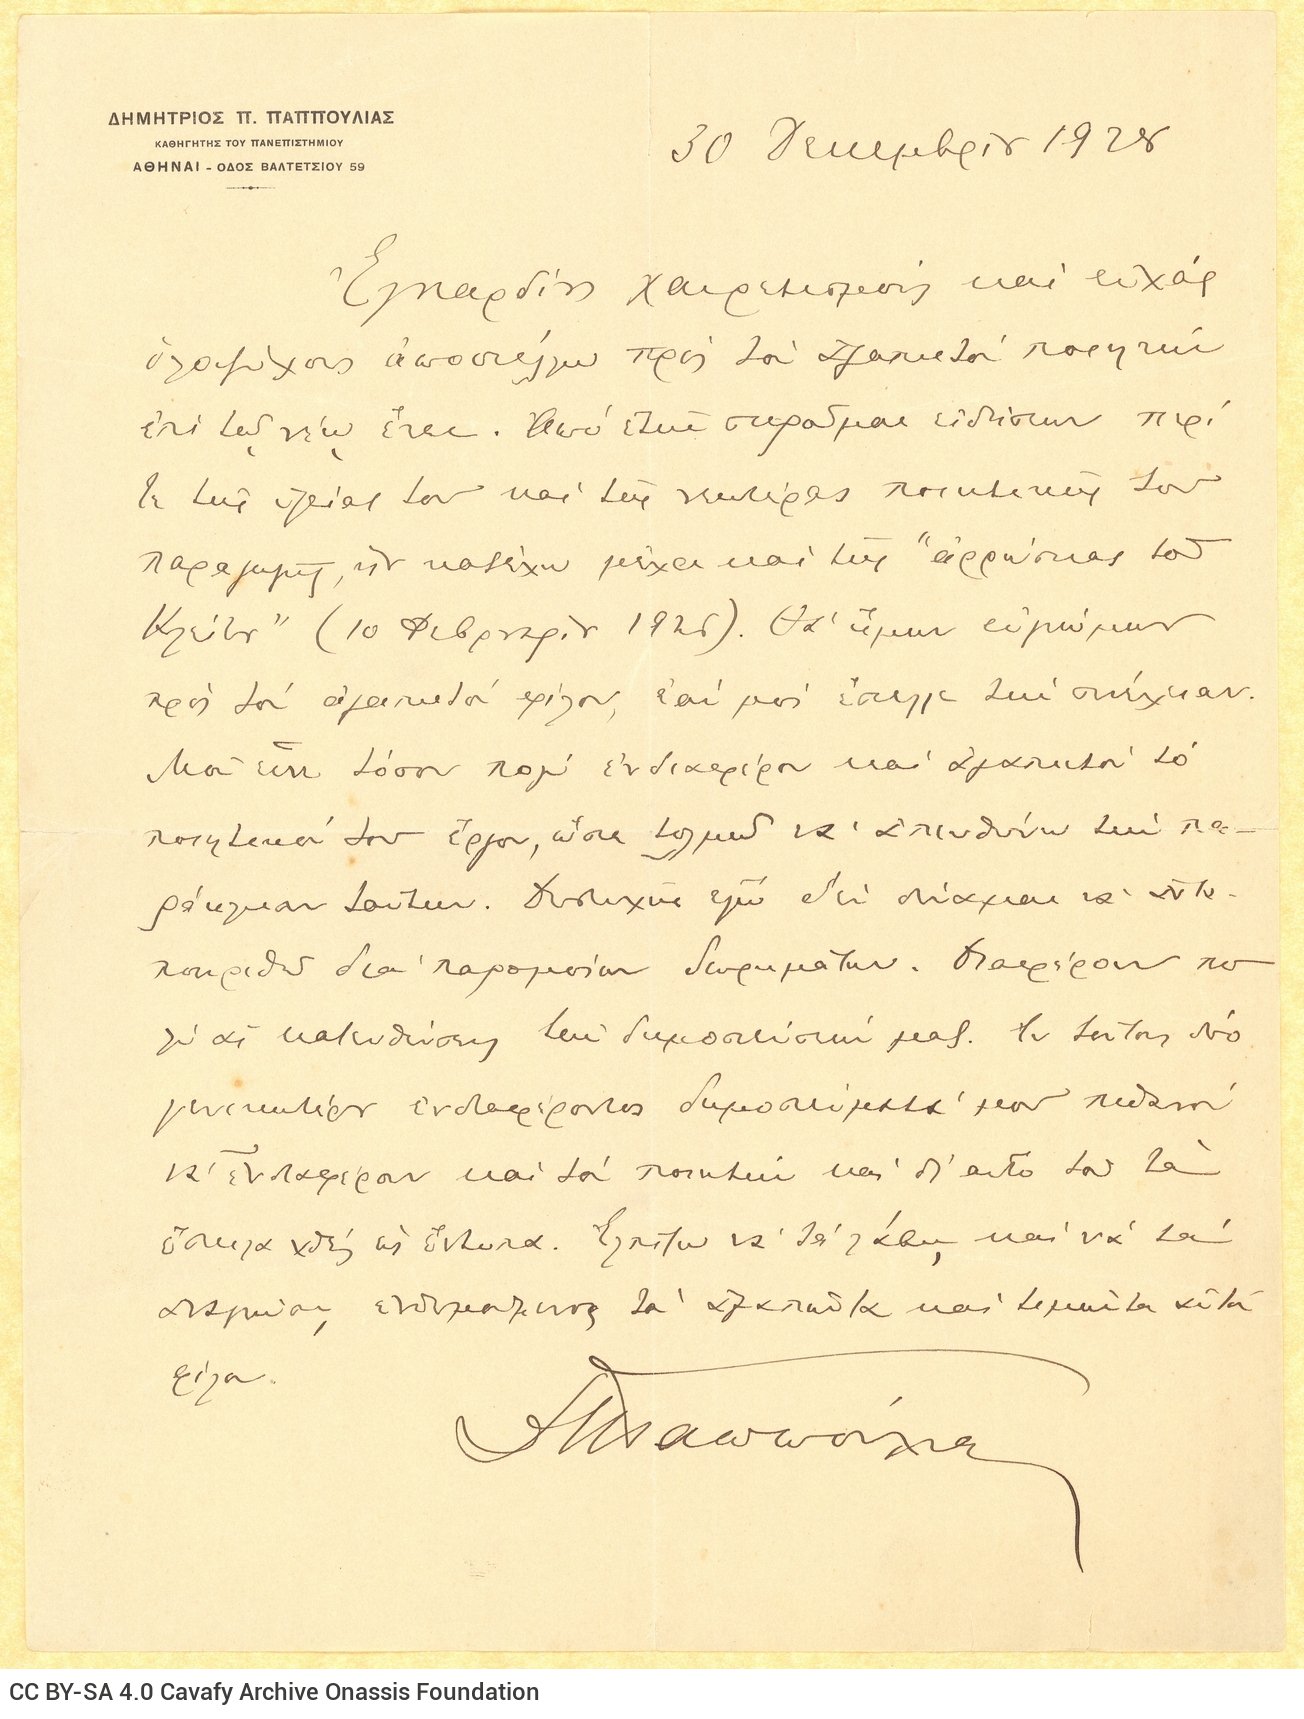 Handwritten letter by university professor Dimitrios P. Pappoulias on the recto of a letterhead of the author. Blank verso. T